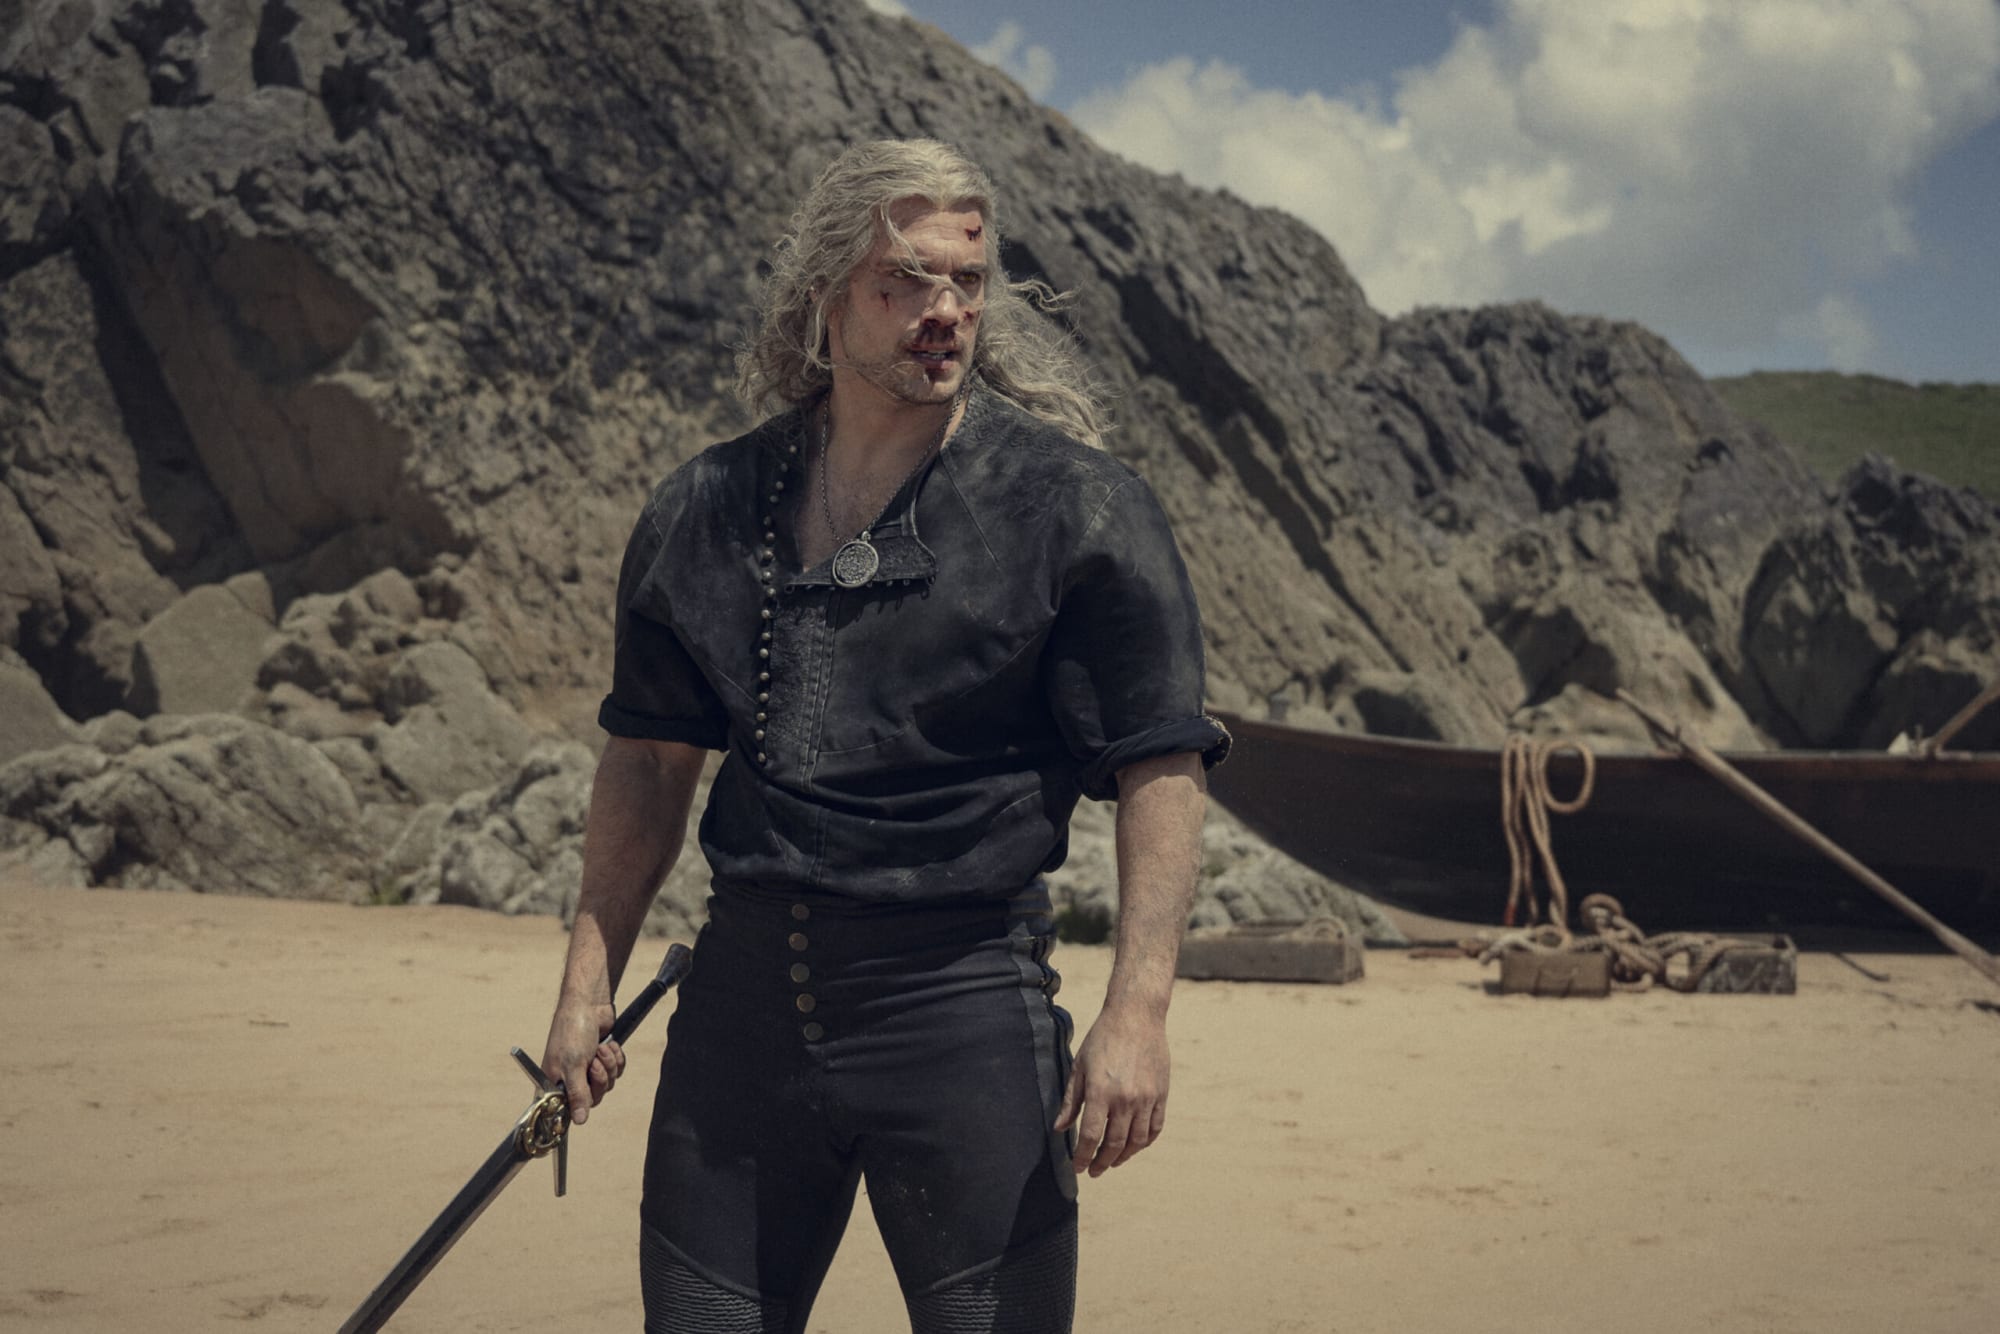 The Witcher director hints at why Henry Cavill left the show